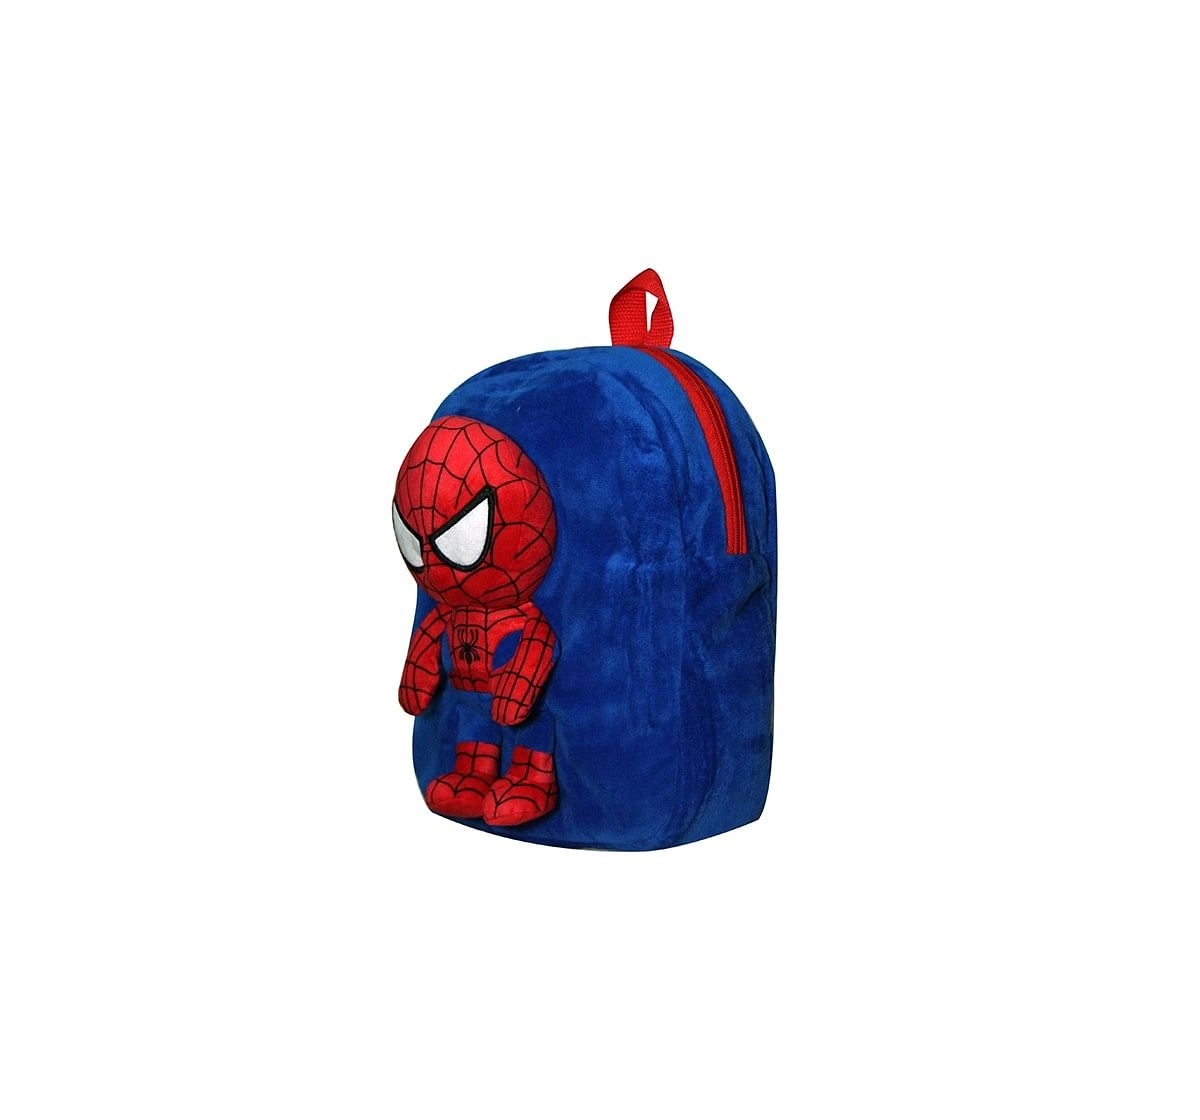 Marvel disney Marvel Spiderman Toy On Bag Plush Accessories for Kids age 3Y+ - 25 Cm (Red)